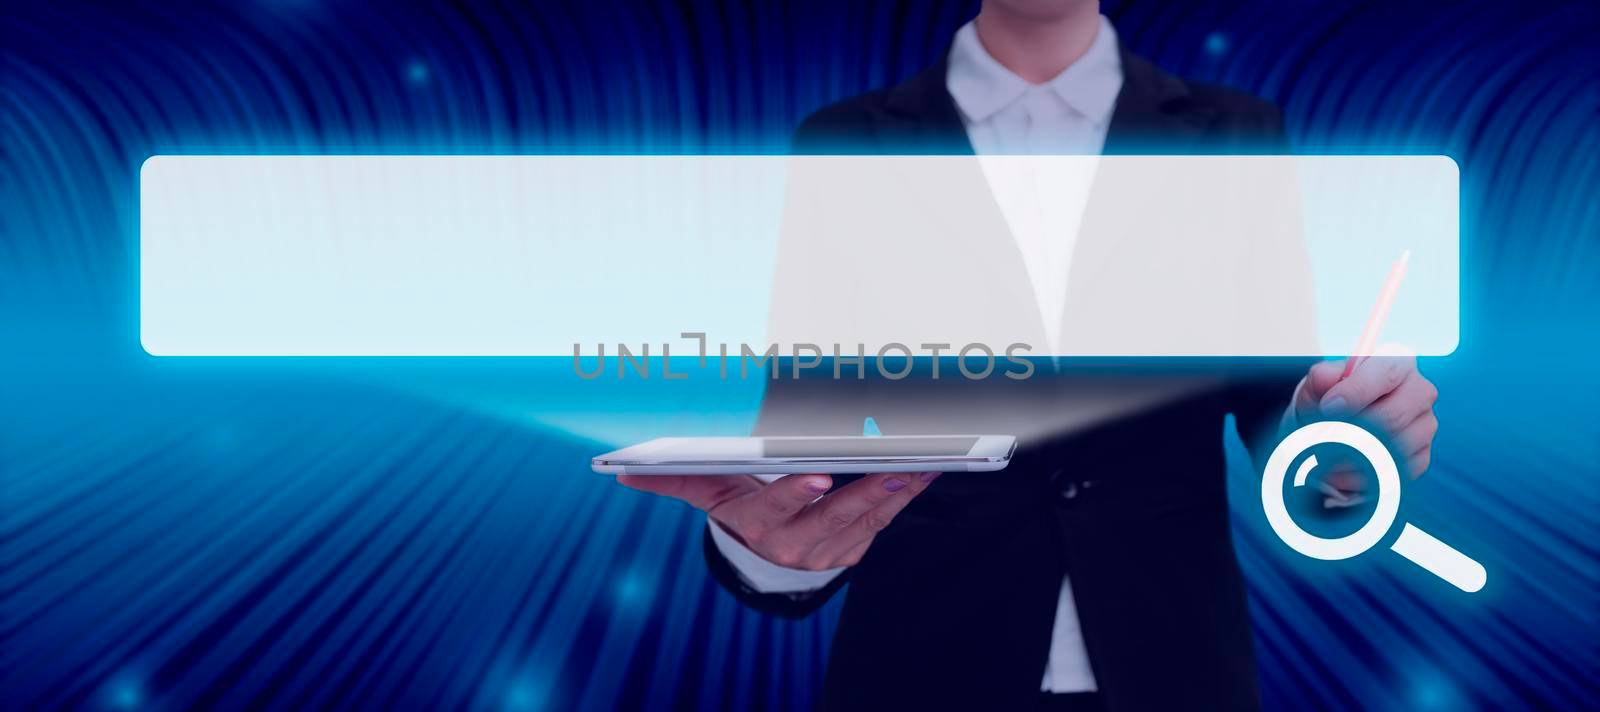 Businesswoman With Tablet And Pen Pointing On Search Bar Looking For Information An Abstract Design. Woman Holding Pad Containing Crucial Data And Messages. by nialowwa